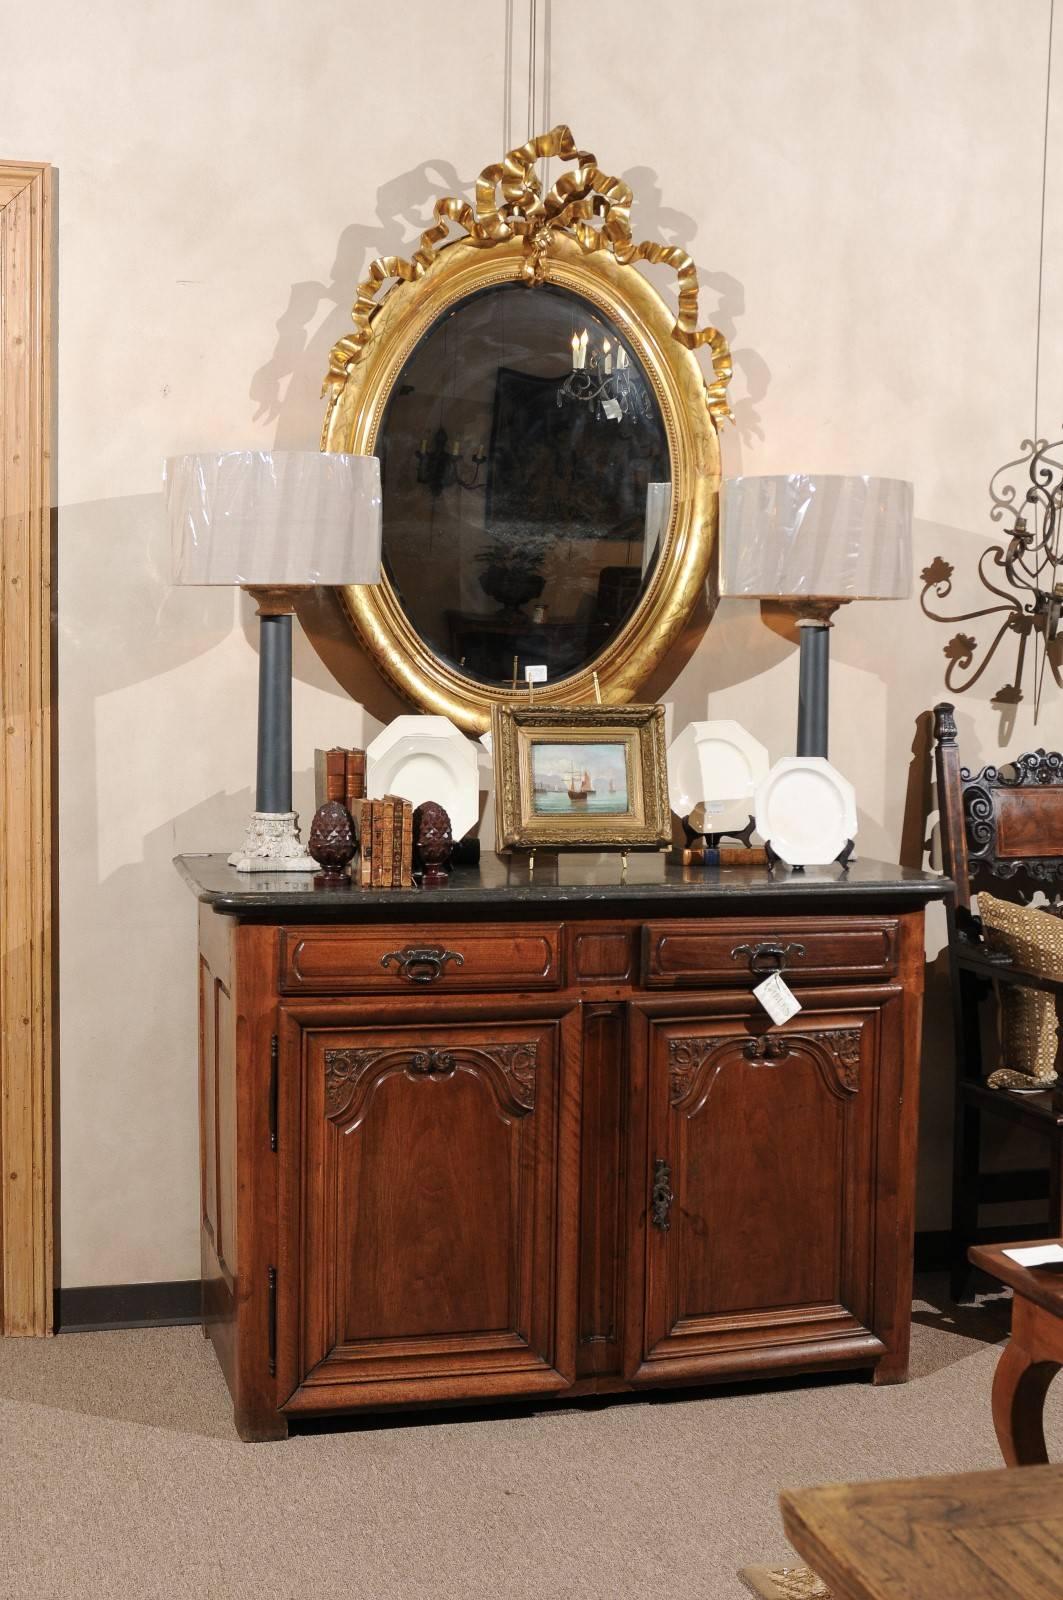 Period Louis XIV walnut buffet with stone top

Everything about this buffet is as it should be. The carving, the paneling on the sides and doors, and the patina are all wonderful. The stone top is dotted with inclusions like fossils and the